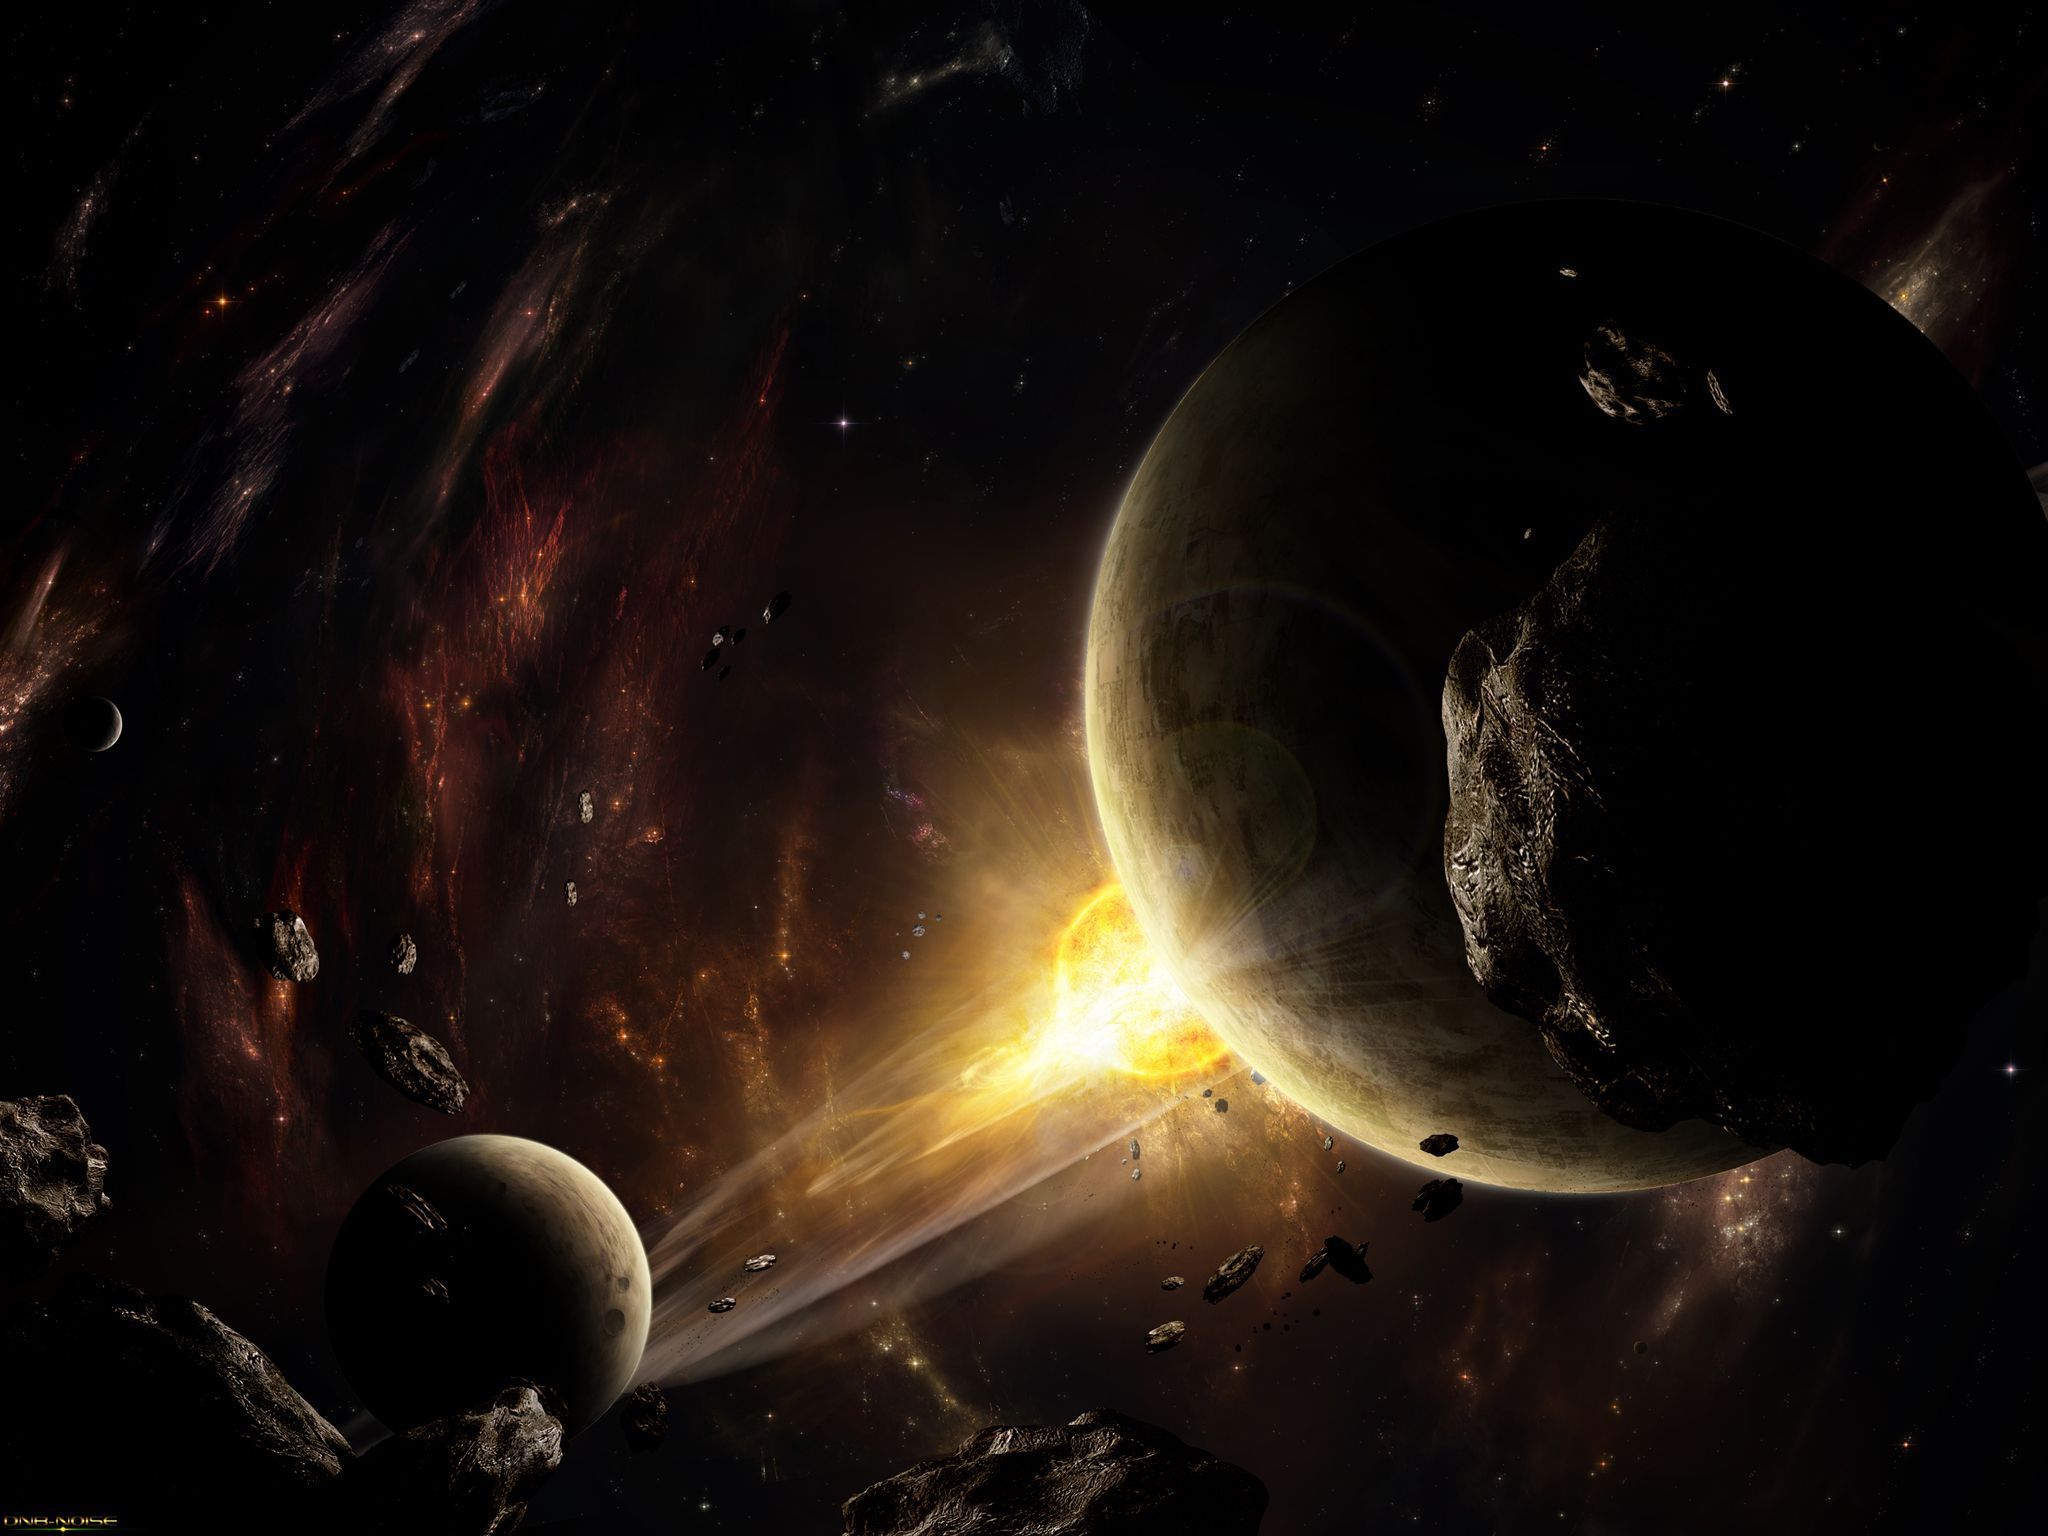 Full HD Wallpapers + Space, Asteroids and Meteoroids, Planets, Sun ...